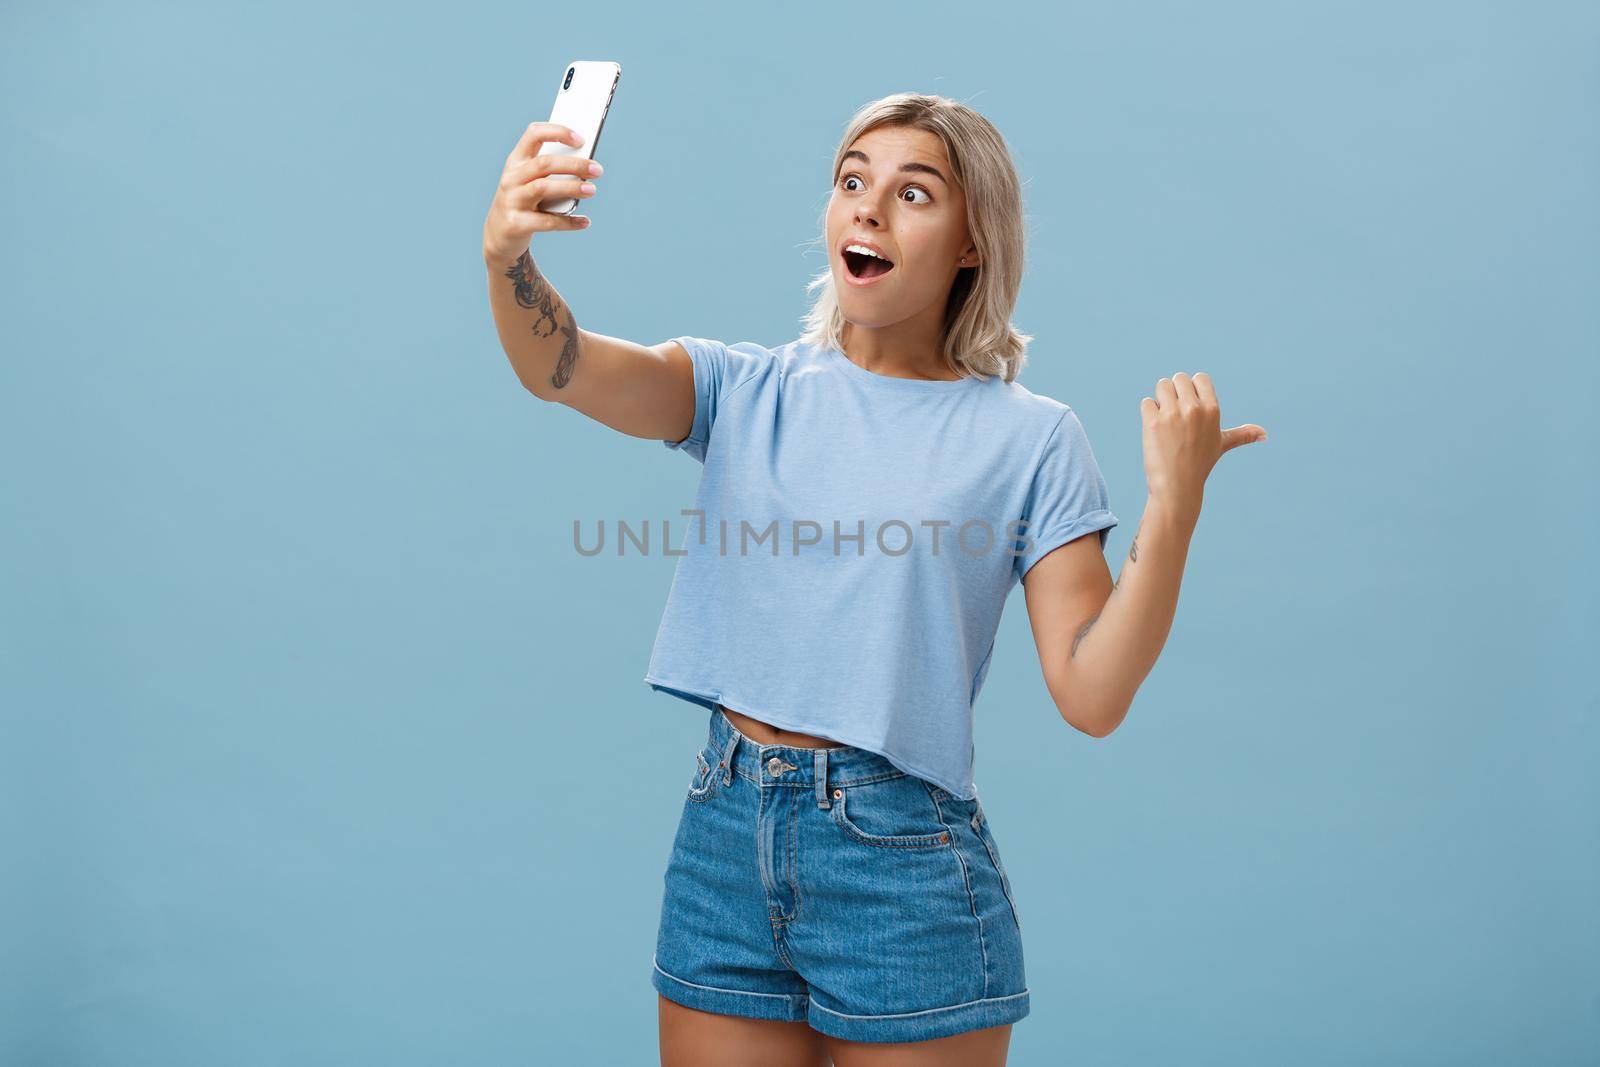 Lifestyle. Girl recording video showing followers awesome scene attending cool event holding smartphone looking impressed and surprised at device screen pointing backwards indicating right over blue wall.